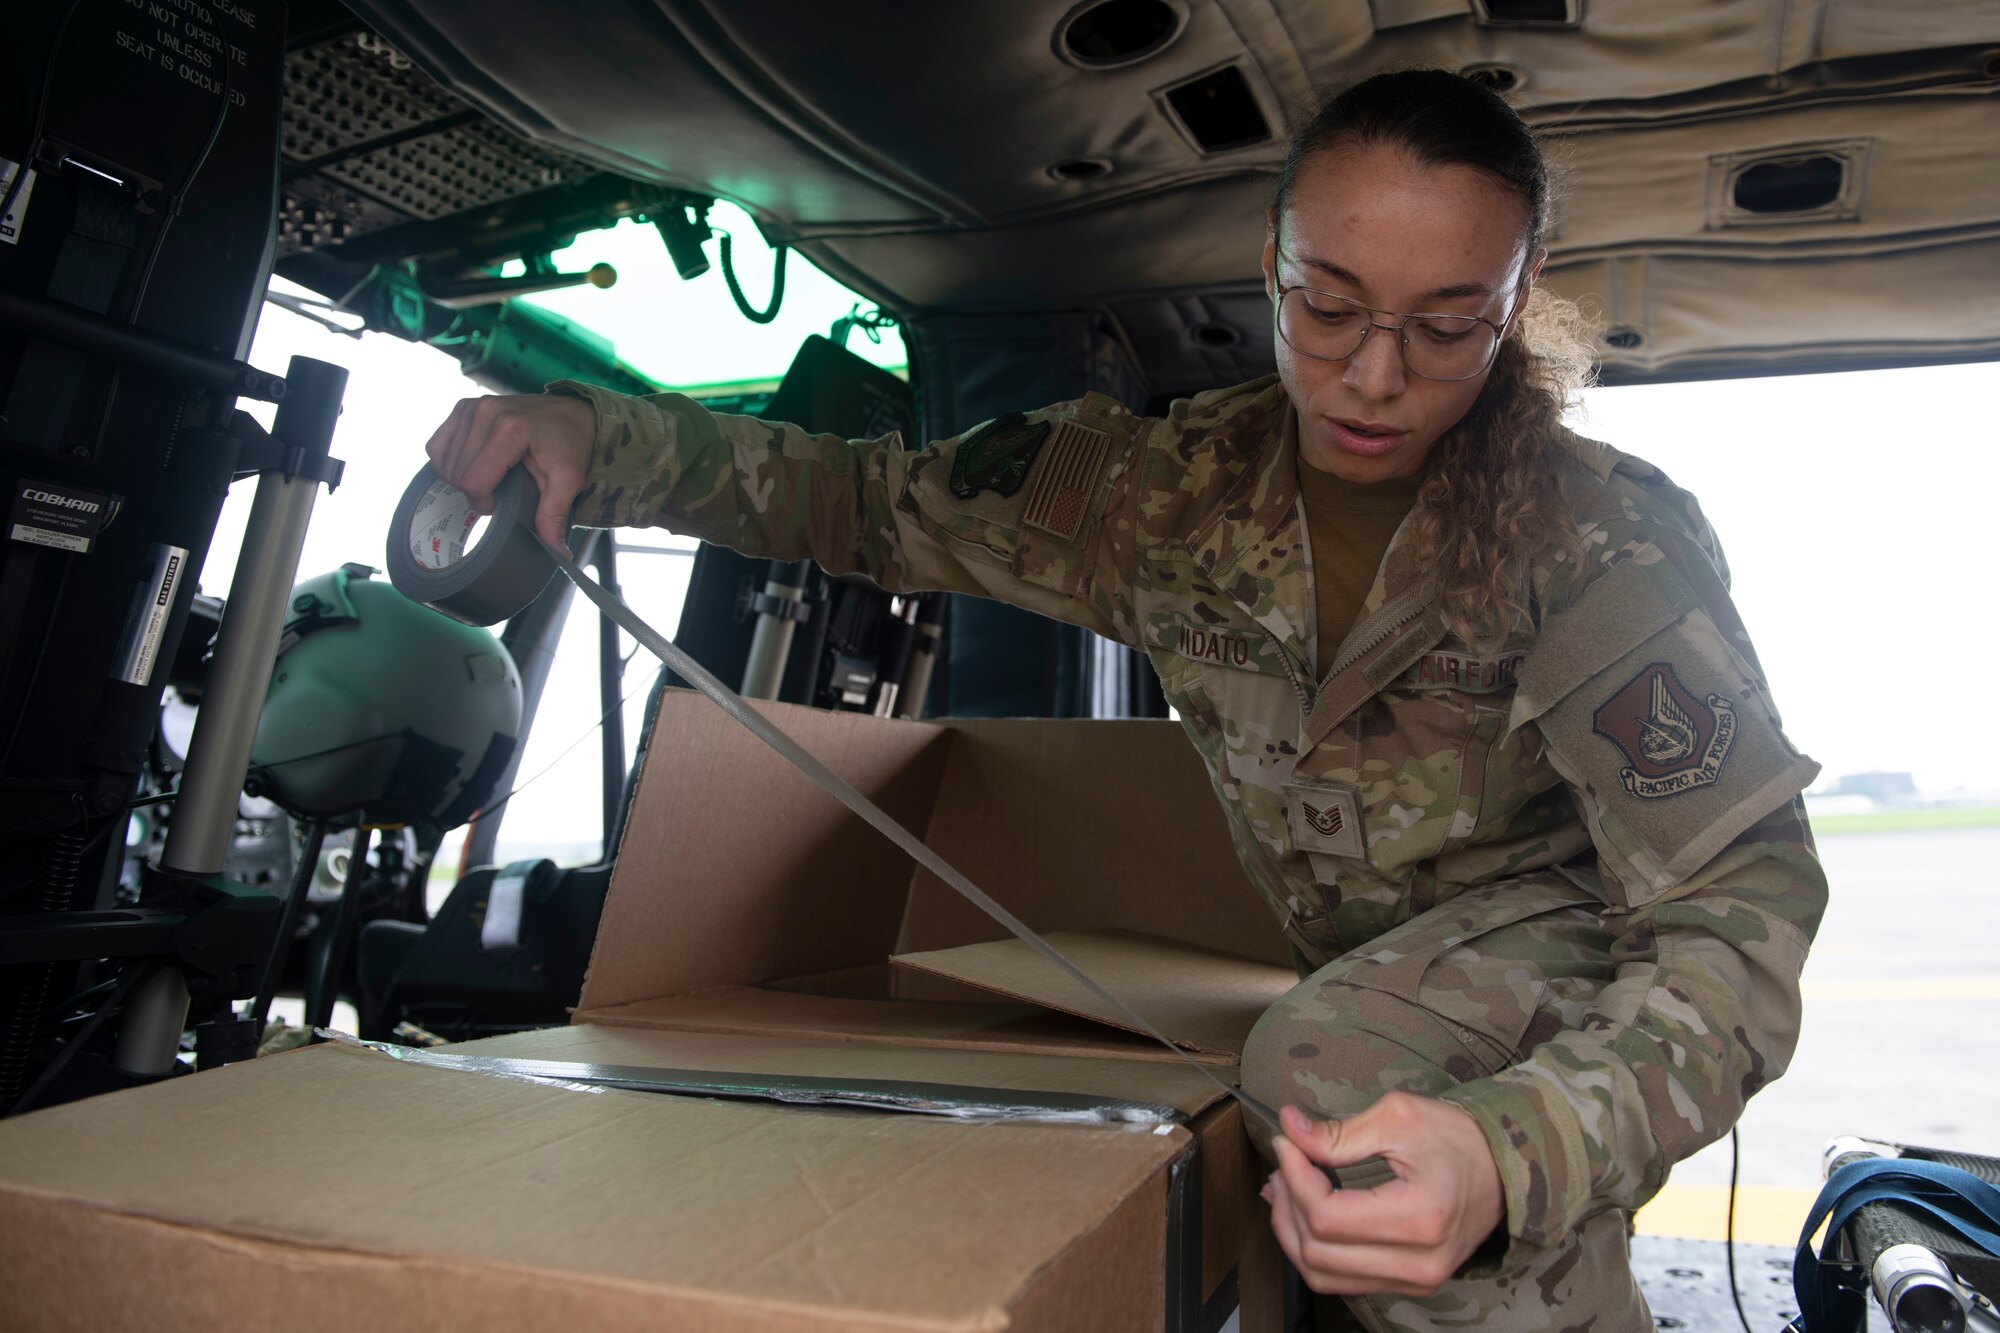 Tech. Sgt. Alexandra Vidato, 459th Airlift Squadron instructor flight engineer, tapes a box of simulated humanitarian aid prior to takeoff for a Tokyo Metropolitan Government hosted disaster preparedness and response drill at Tokyo Rinkai Disaster Prevention Park, Japan, Sept. 3, 2022. Taking off from Yokota Air Base, the 459th utilized a UH-1N Iroquois helicopter to deliver mock humanitarian aid after a simulated natural disaster. (U.S. Air Force photo by Tech. Sgt. Joshua Edwards)